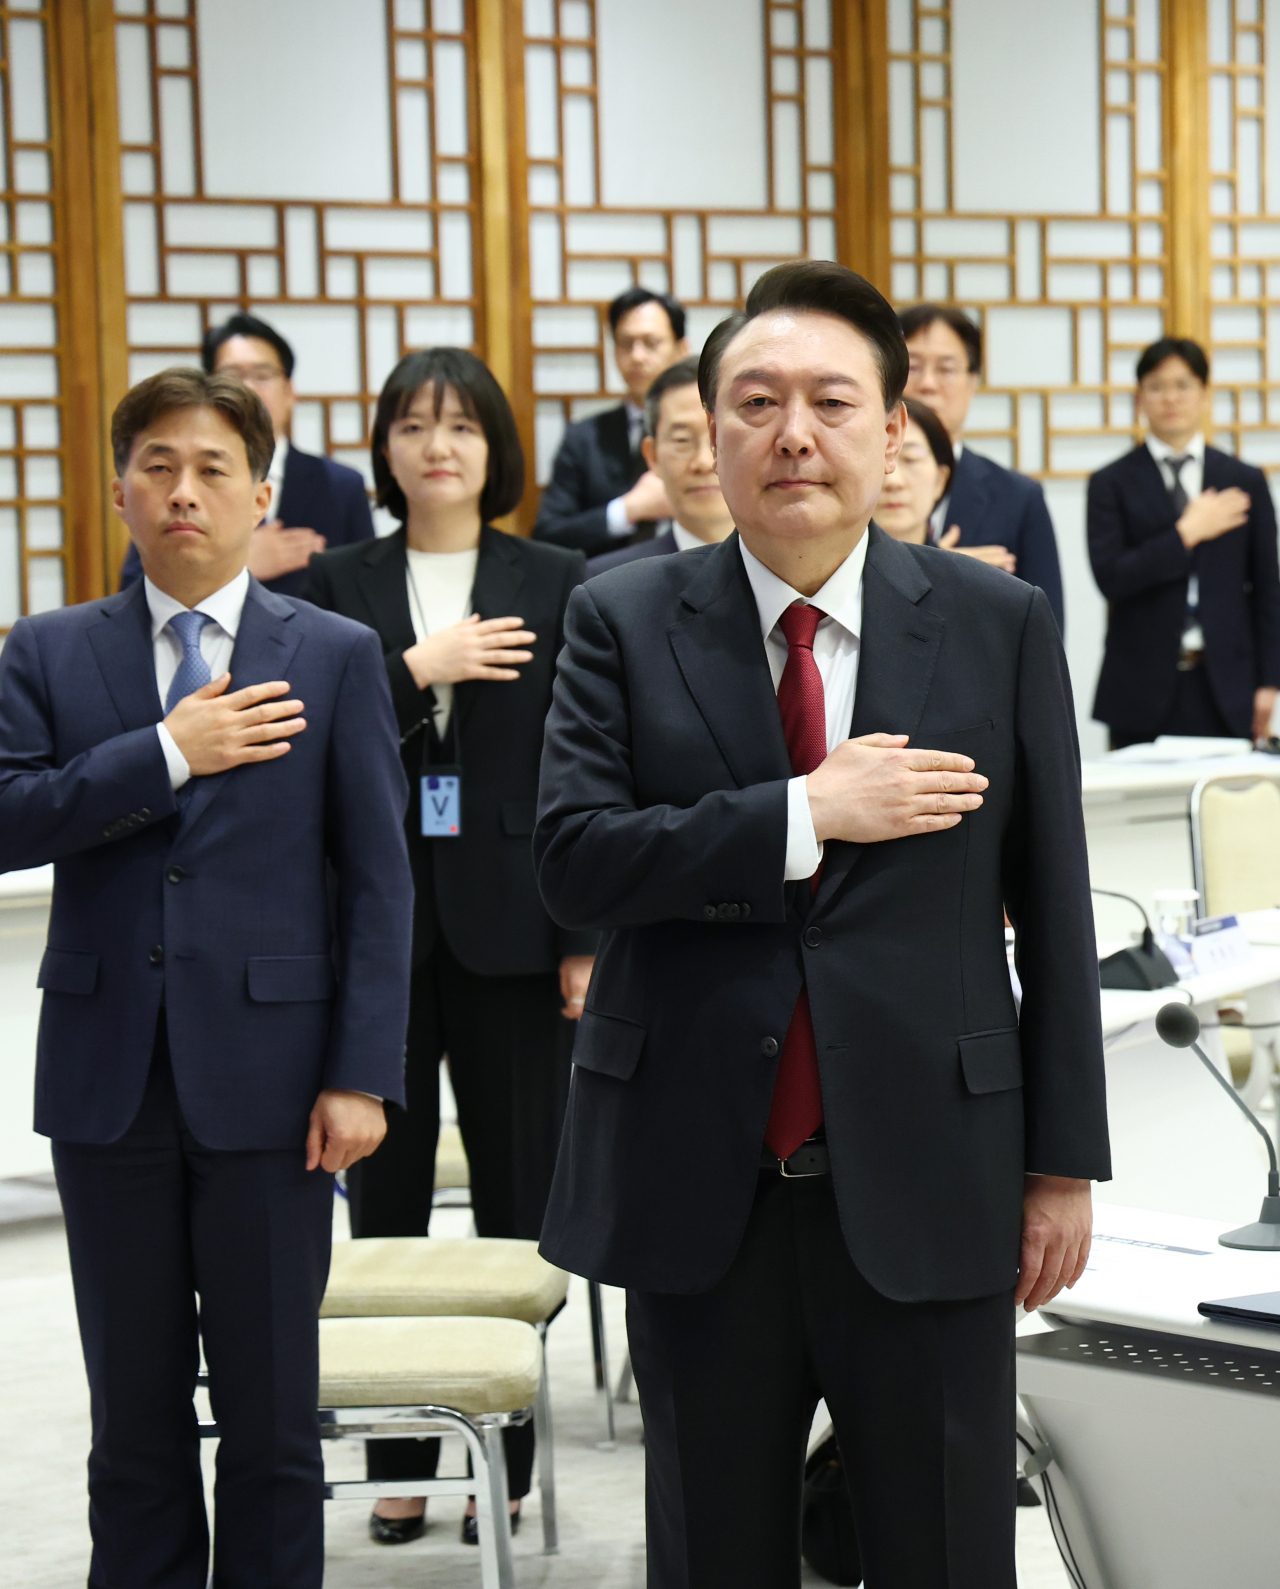 President Yoon Suk Yeol (right, front row) salutes to the national flag as he presided over a meeting with semiconductor industry leaders at his office in Seoul on April 9. (Pool photo via Yonhap)